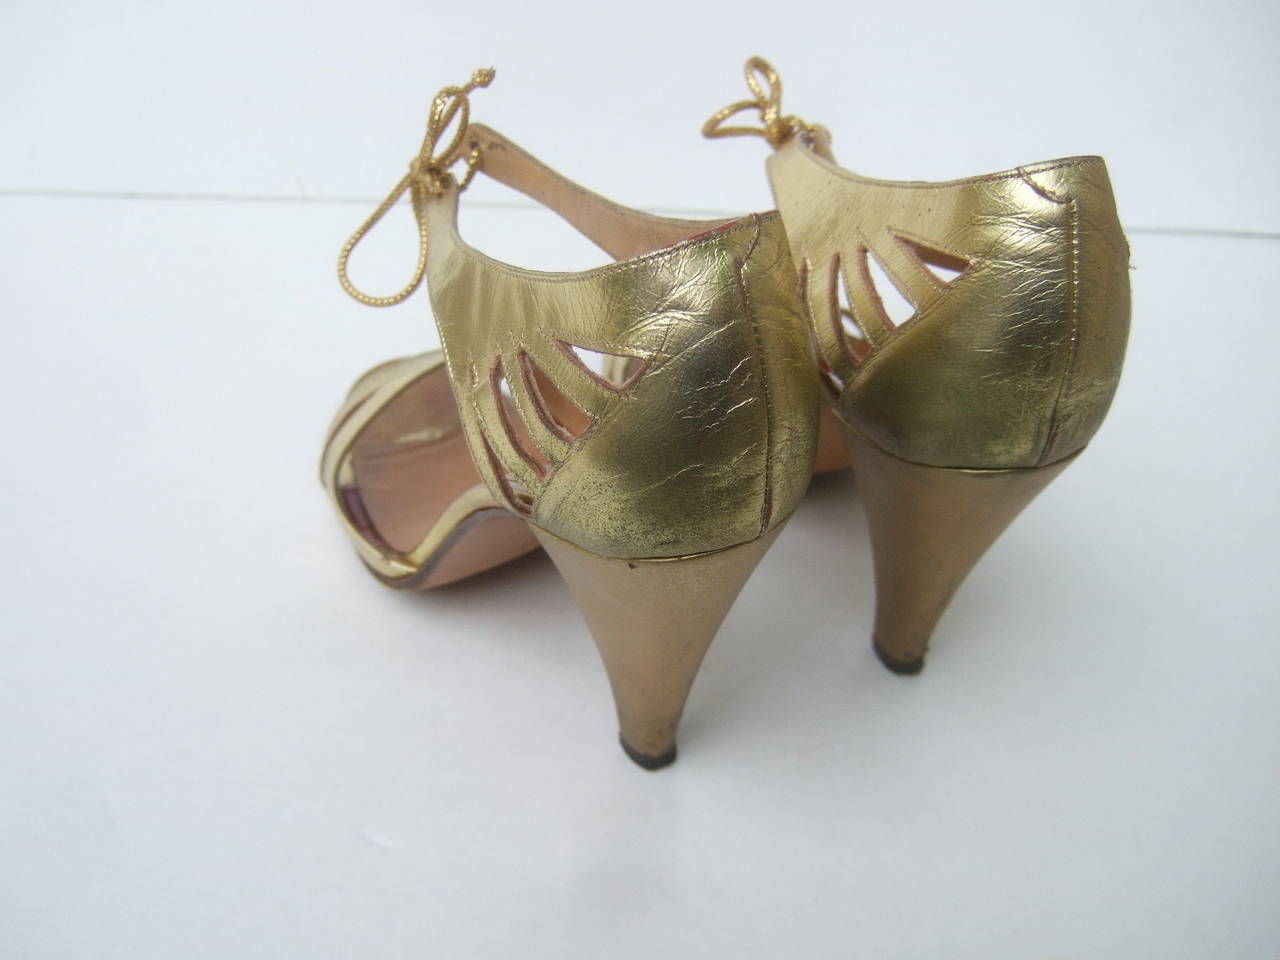 Women's Maud Frizon Paris Gold Leather Strappy Heels Made in Italy Size 37 1/2